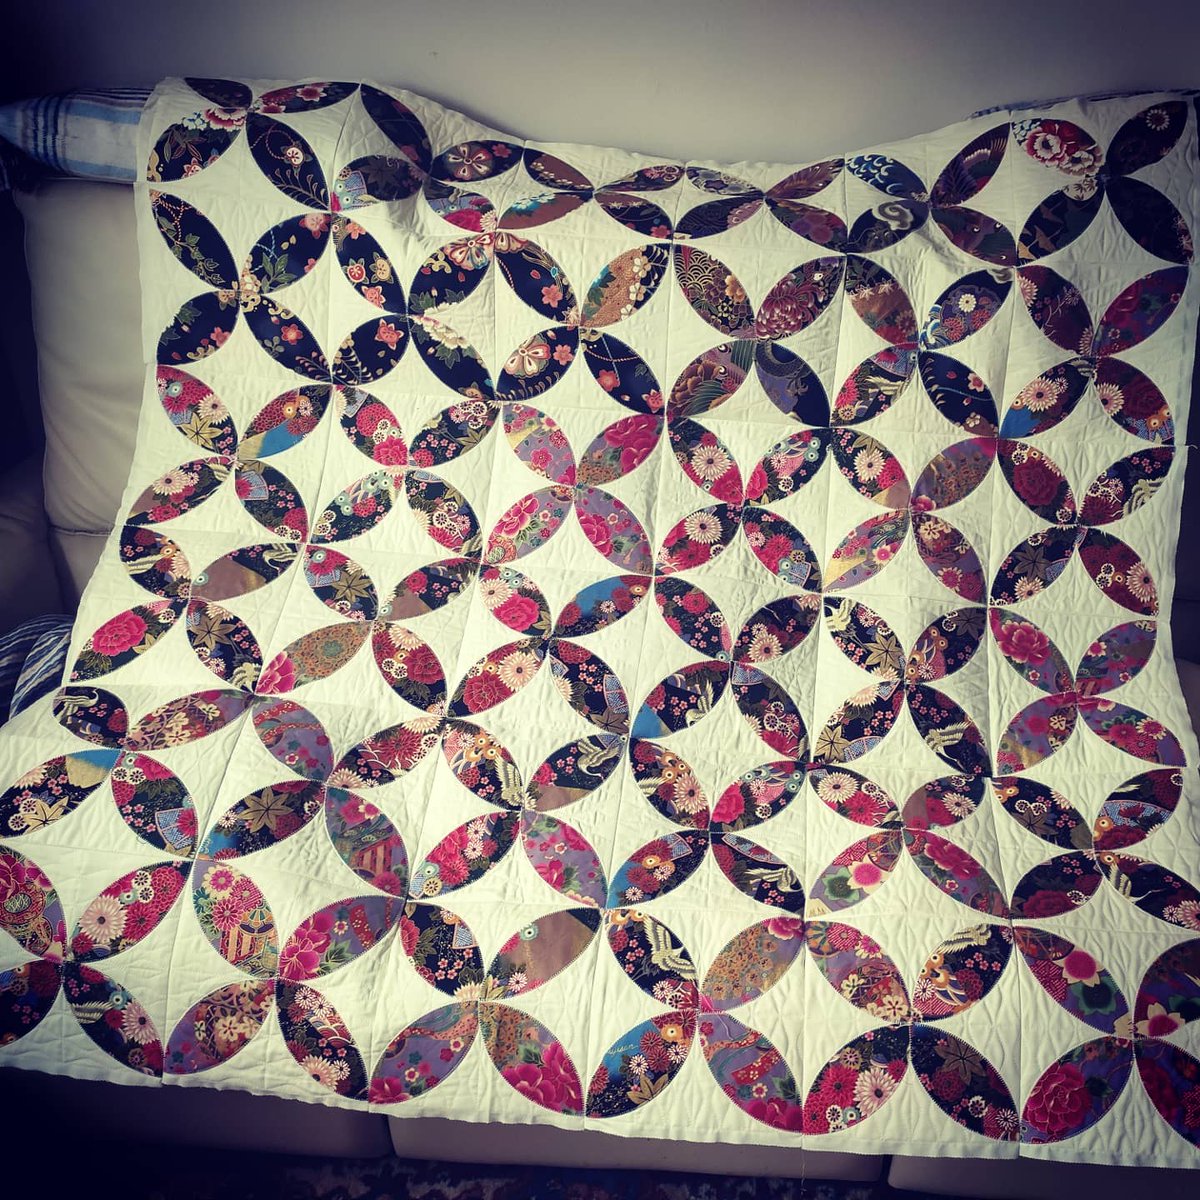 Finished my Orange Peel Quilt Top Today.  My custom templates from Martelli Notions made cutting the shapes  breeze !

#martellinotions #MadewithMartelli #OrangePeel #Quilt #quilting #Sewing #applique #Bernina #B590 #OESD #Mettler #SilkFinish